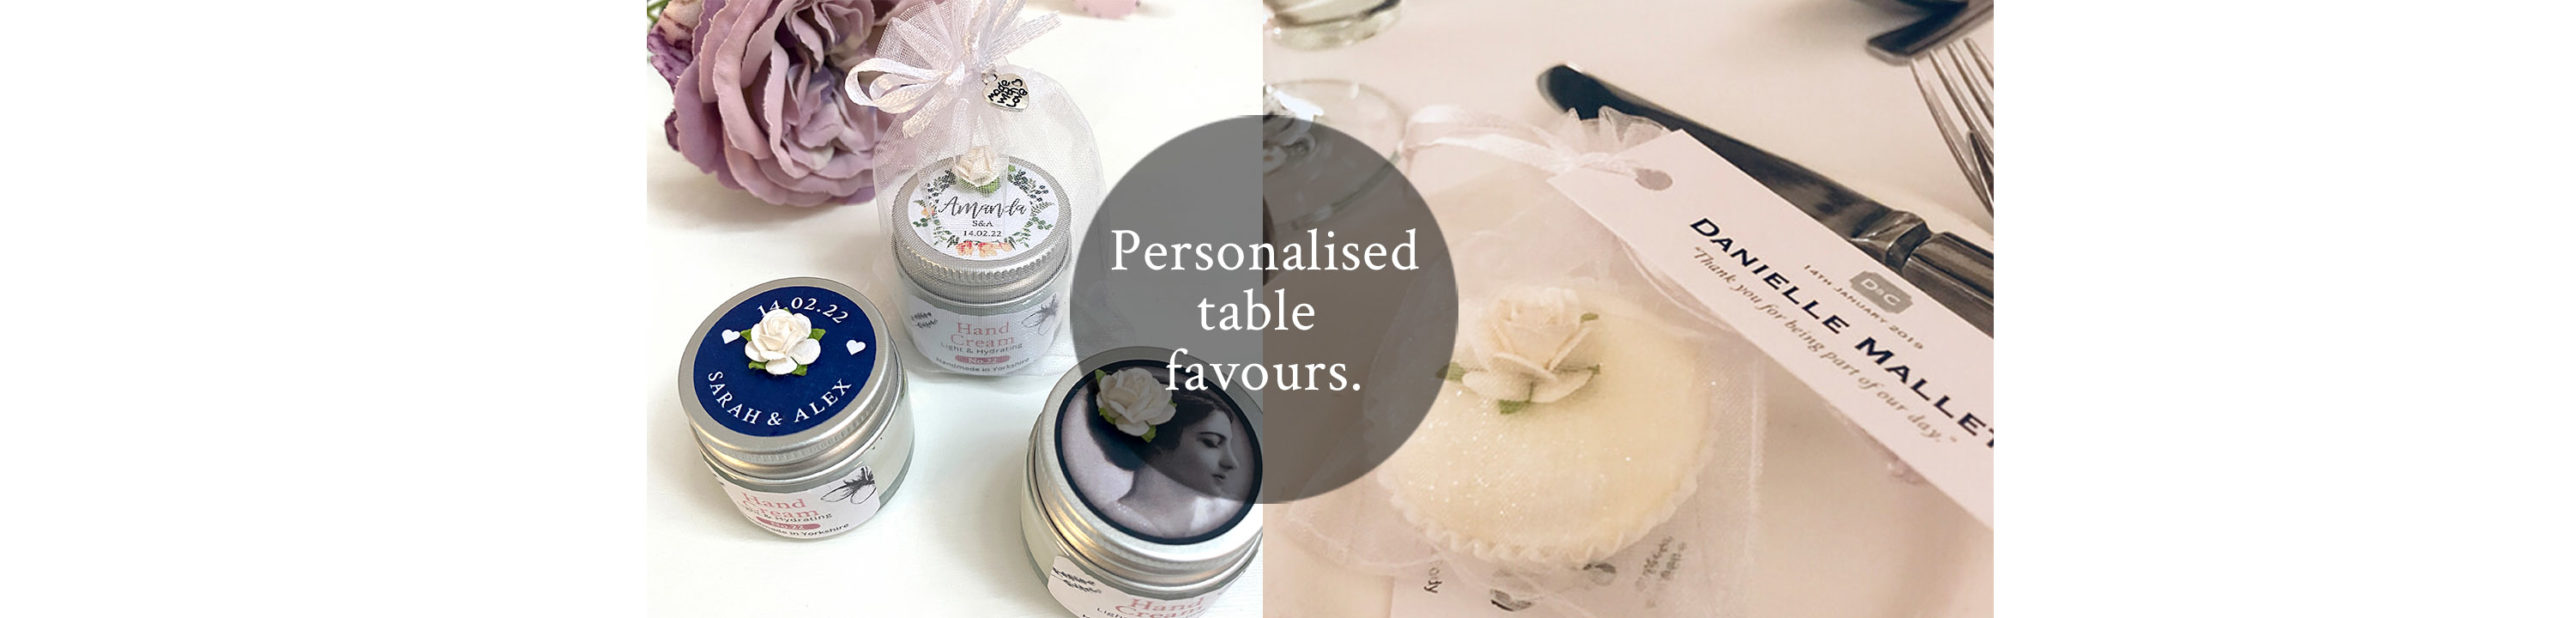 Personalised Wedding Favours and Wedding Gifts Table Favours